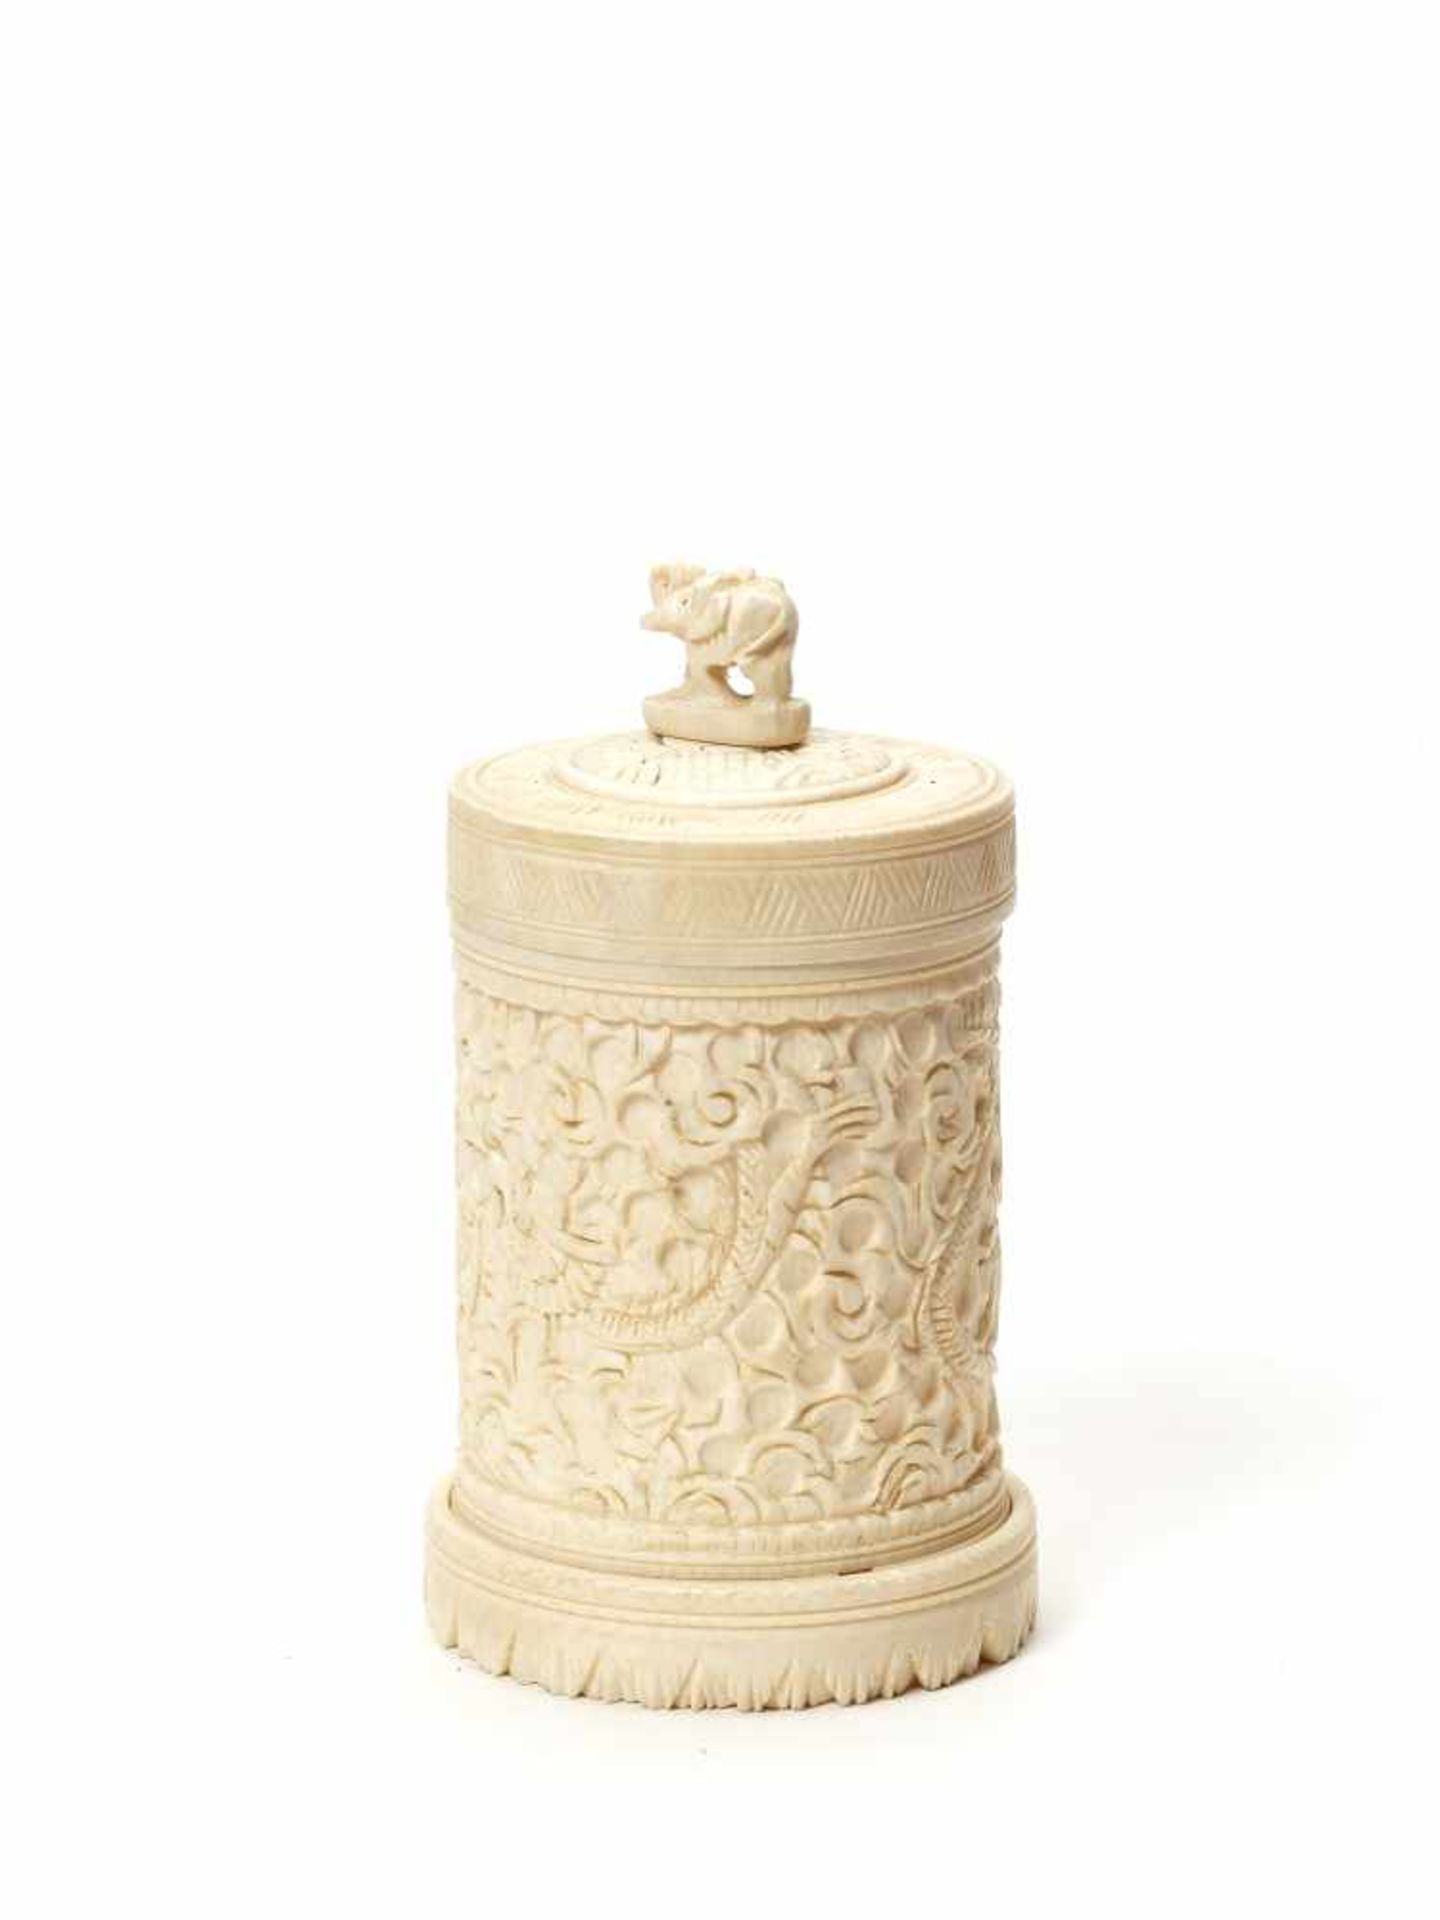 AN INDIAN IVORY BOX AND COVER, C. 1880IvoryIndia, c. 1880This Indian ivory box and cover features - Image 3 of 5